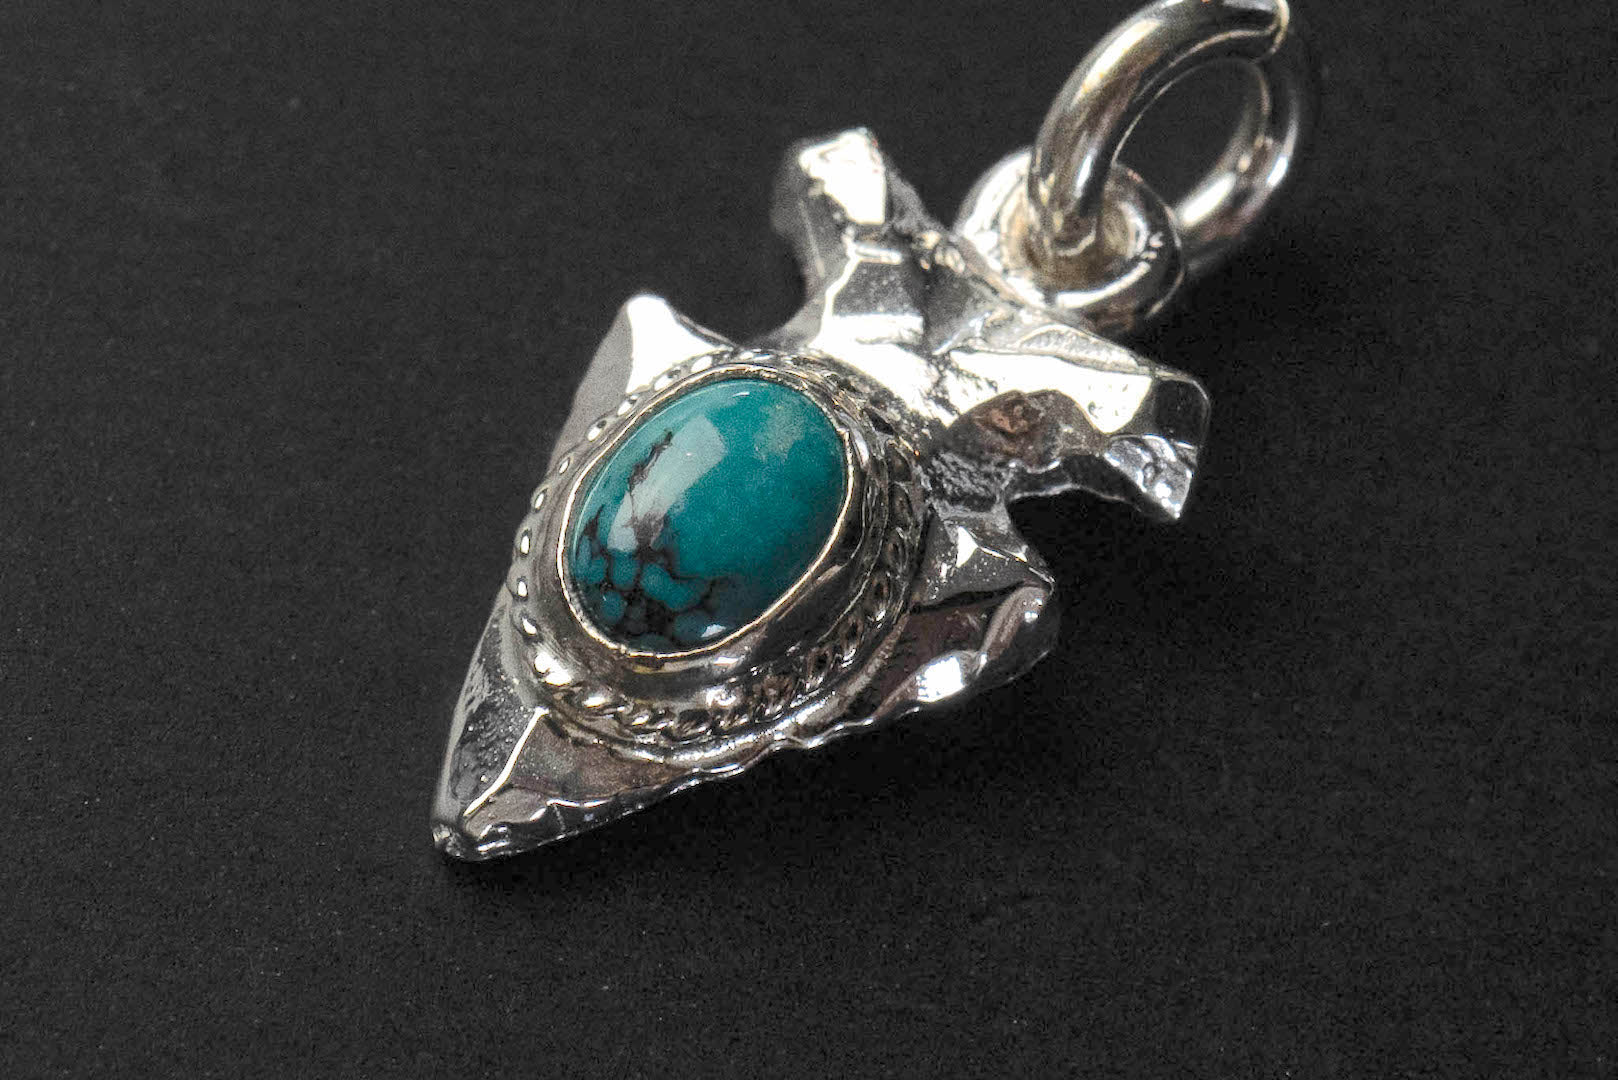 First Arrow's Size Medium "Arrow Head" Pendant With With Turquoise Stone (P-207)